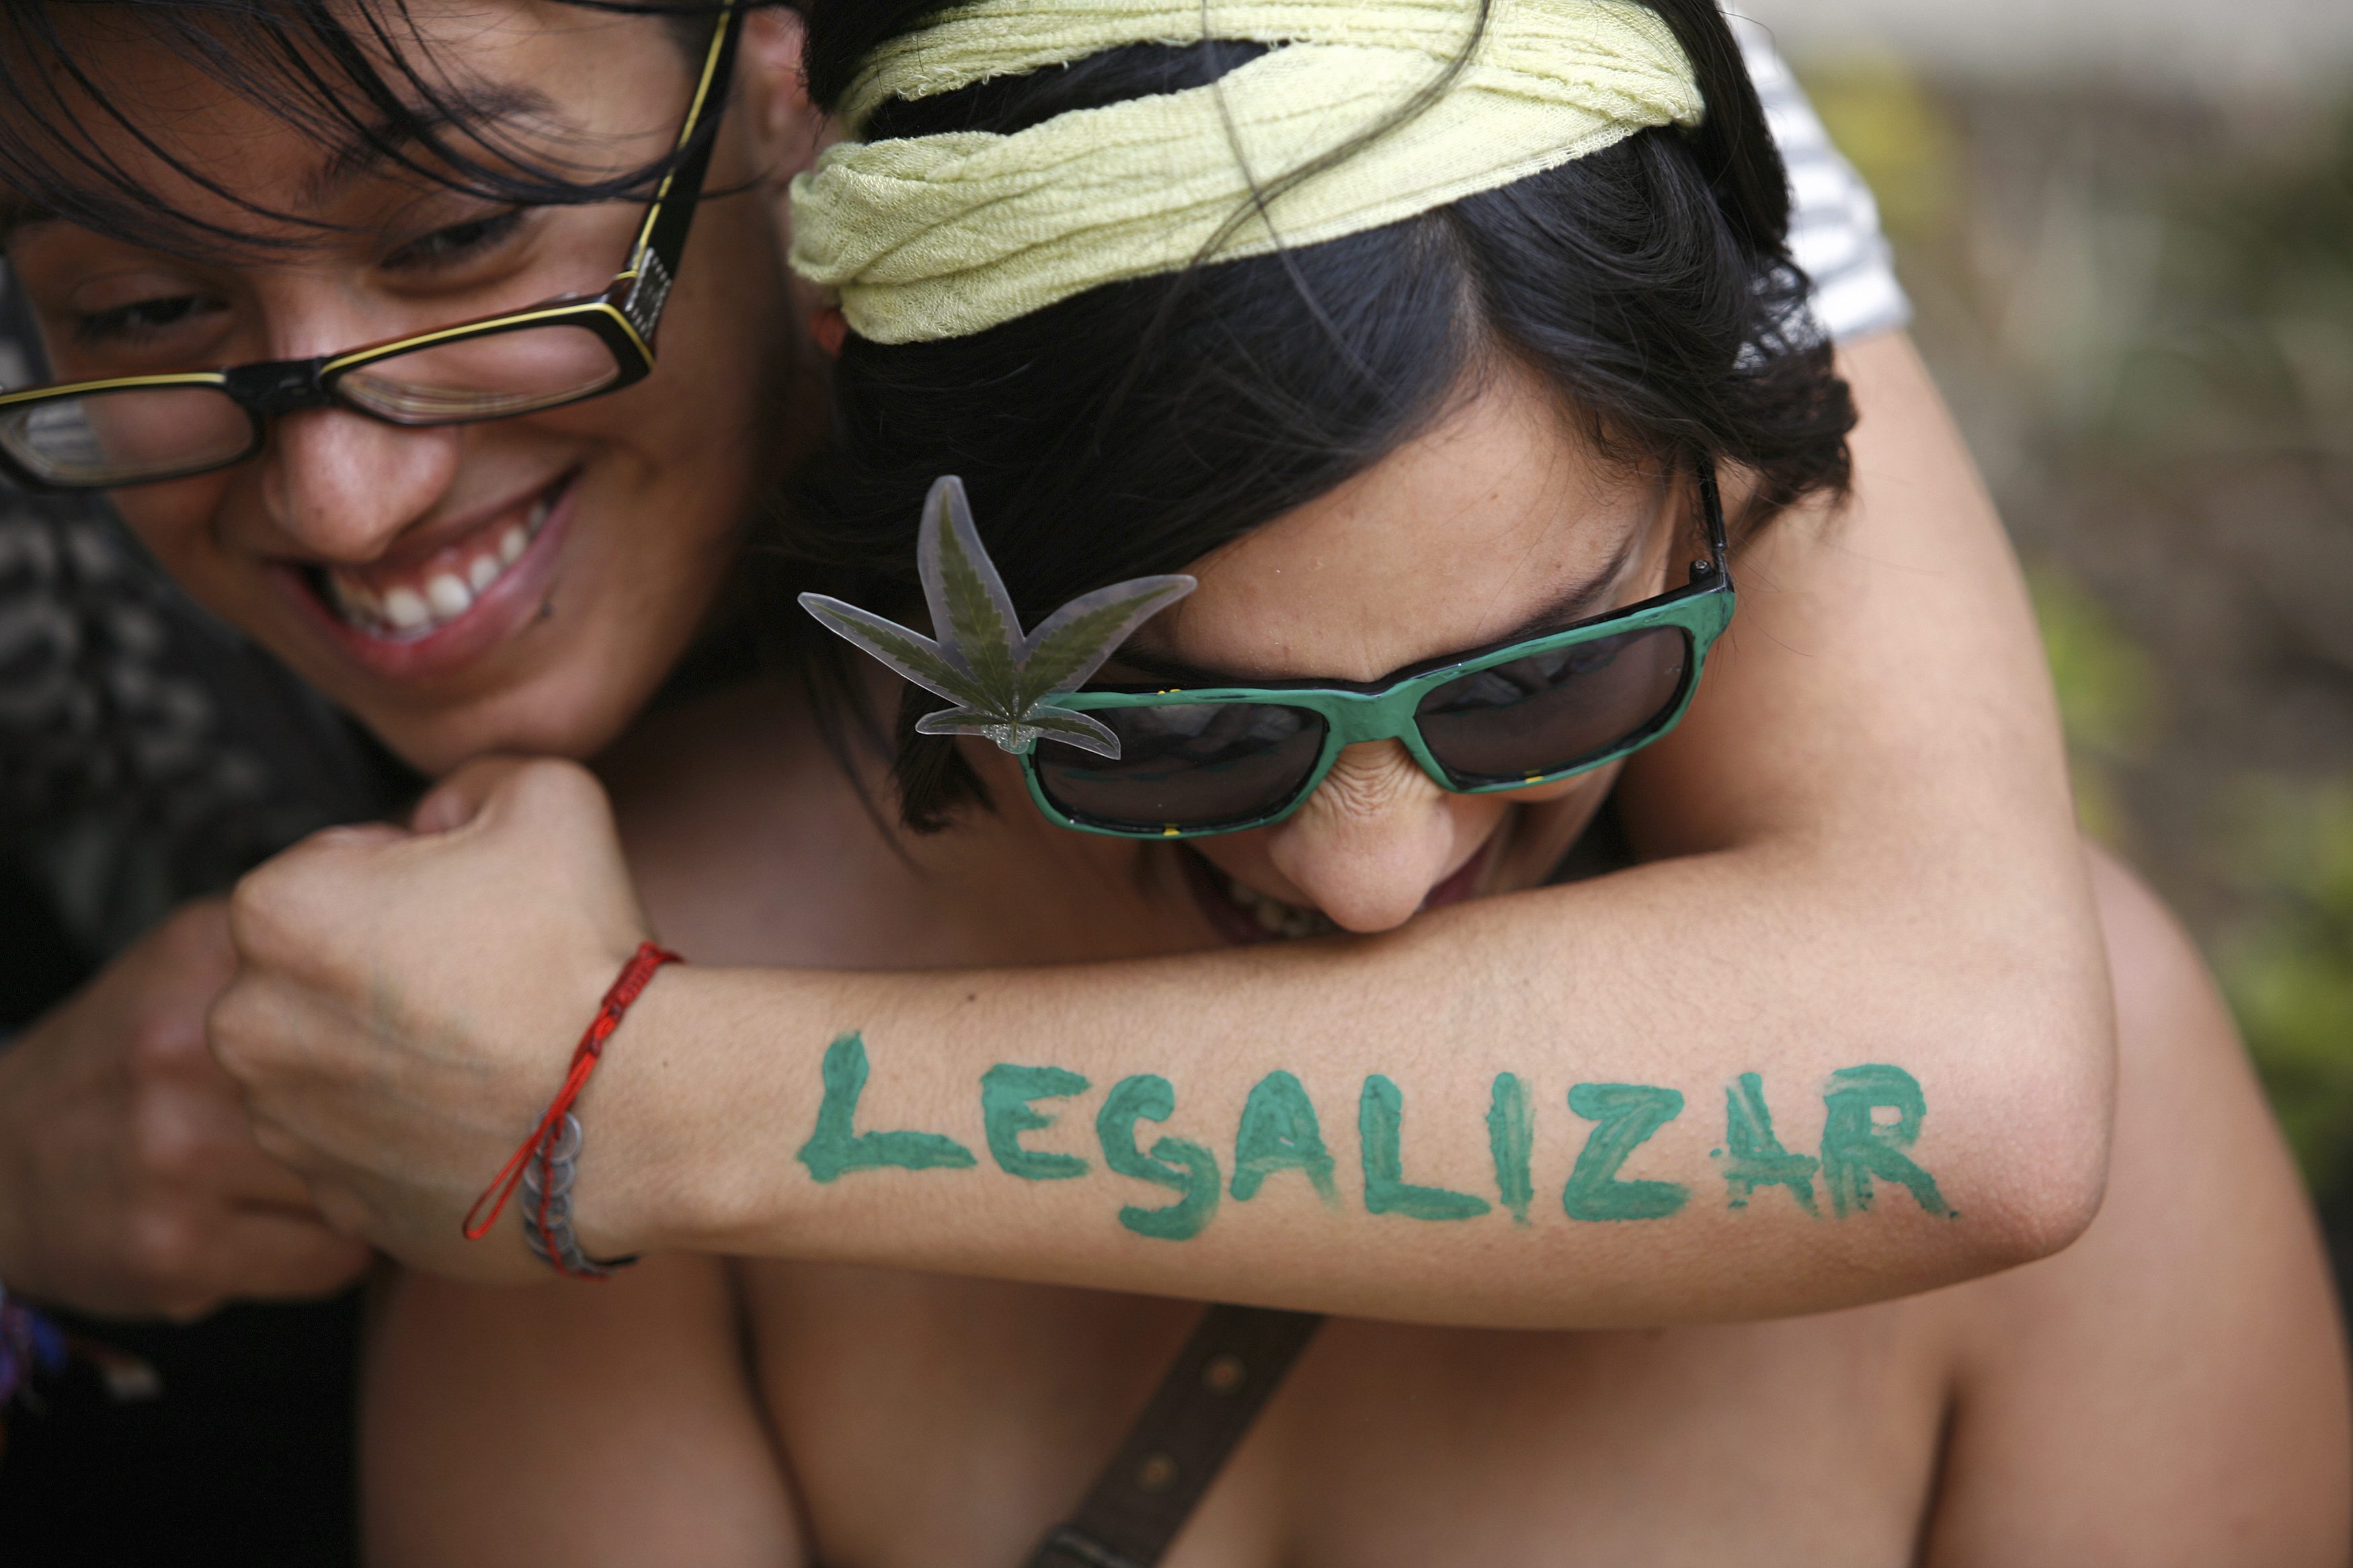 A woman embraces her friend during a rally to demand the legalization of marijuana in Mexico City. Photo: Reuters